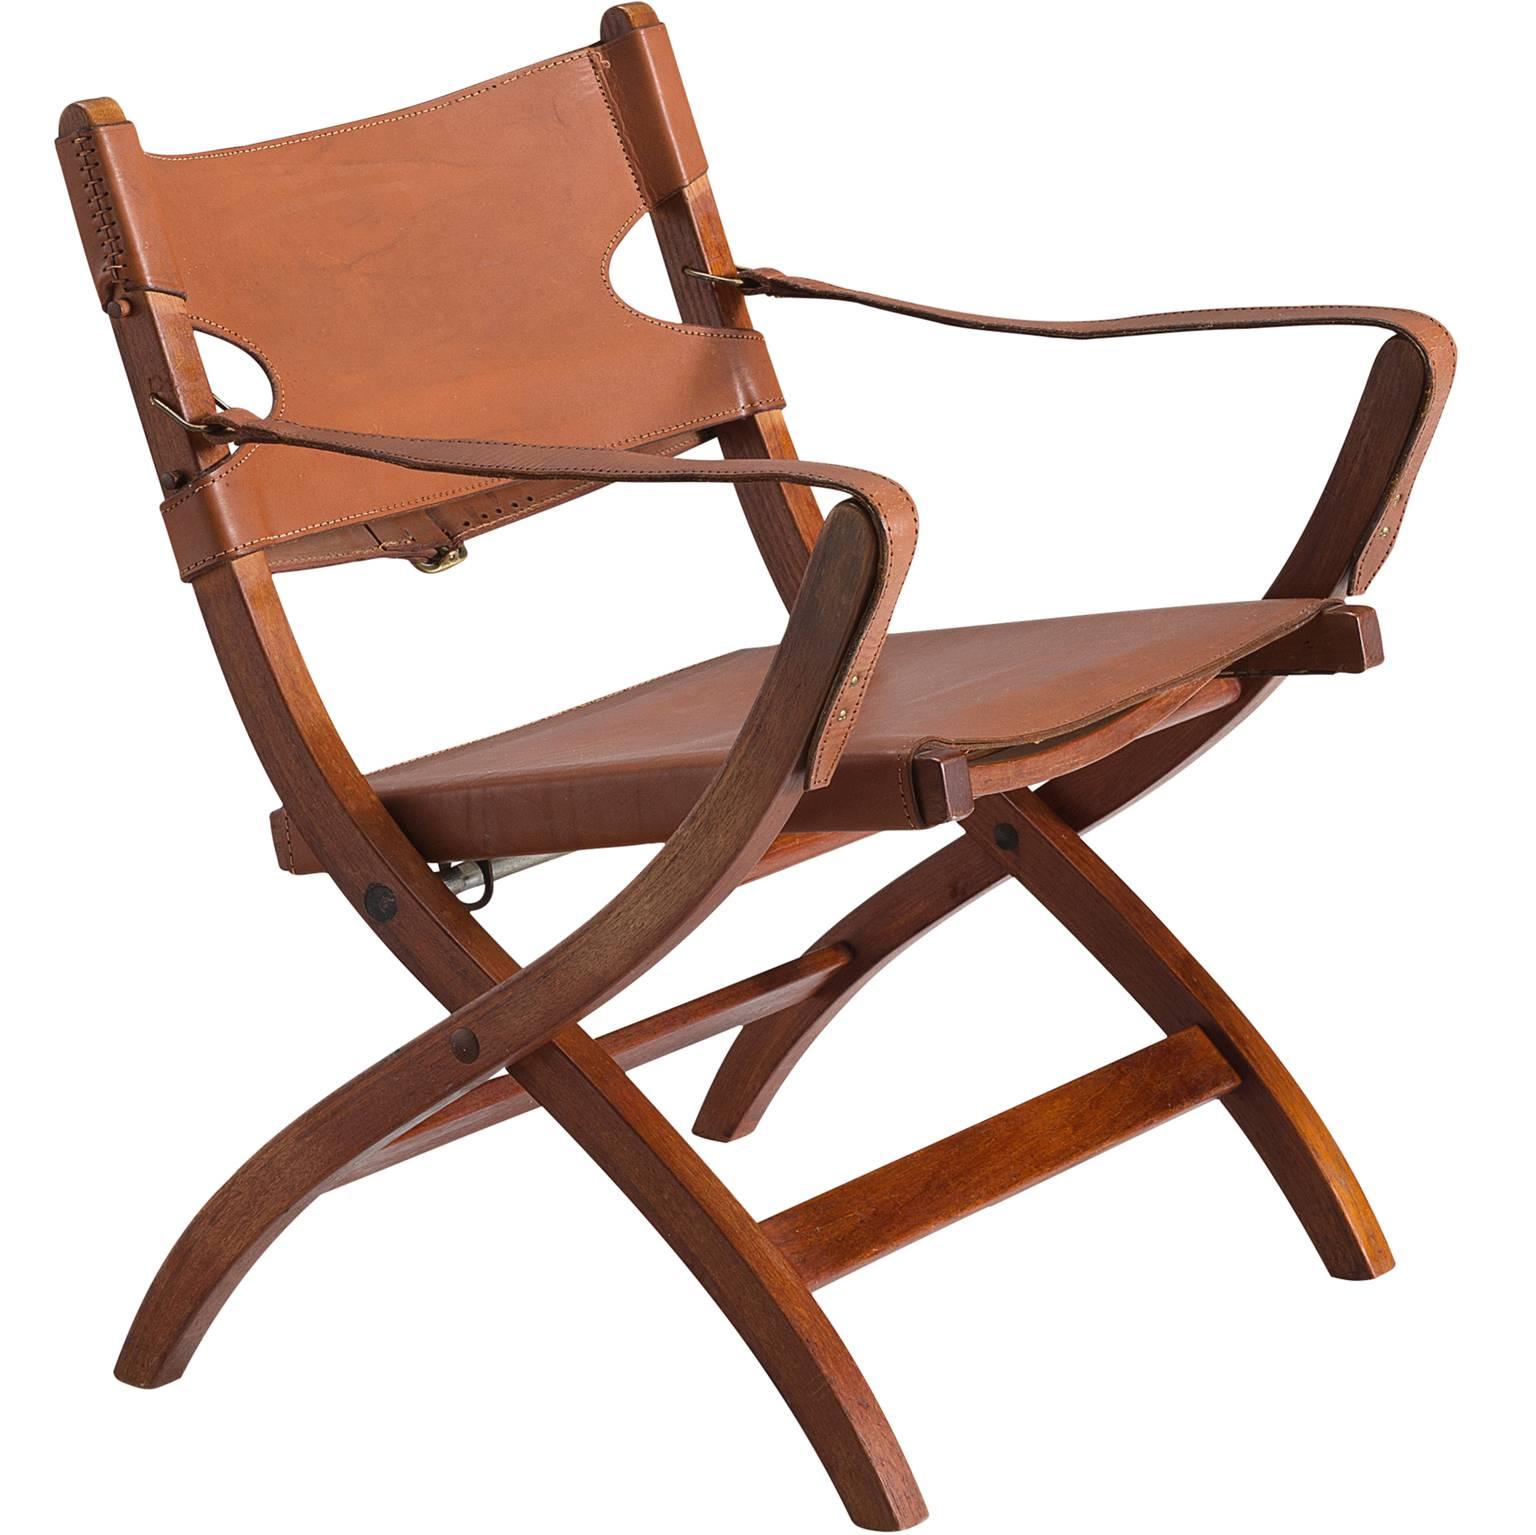 Poul Hundevad 'Campaign' X-Chairs in Cognac Leather